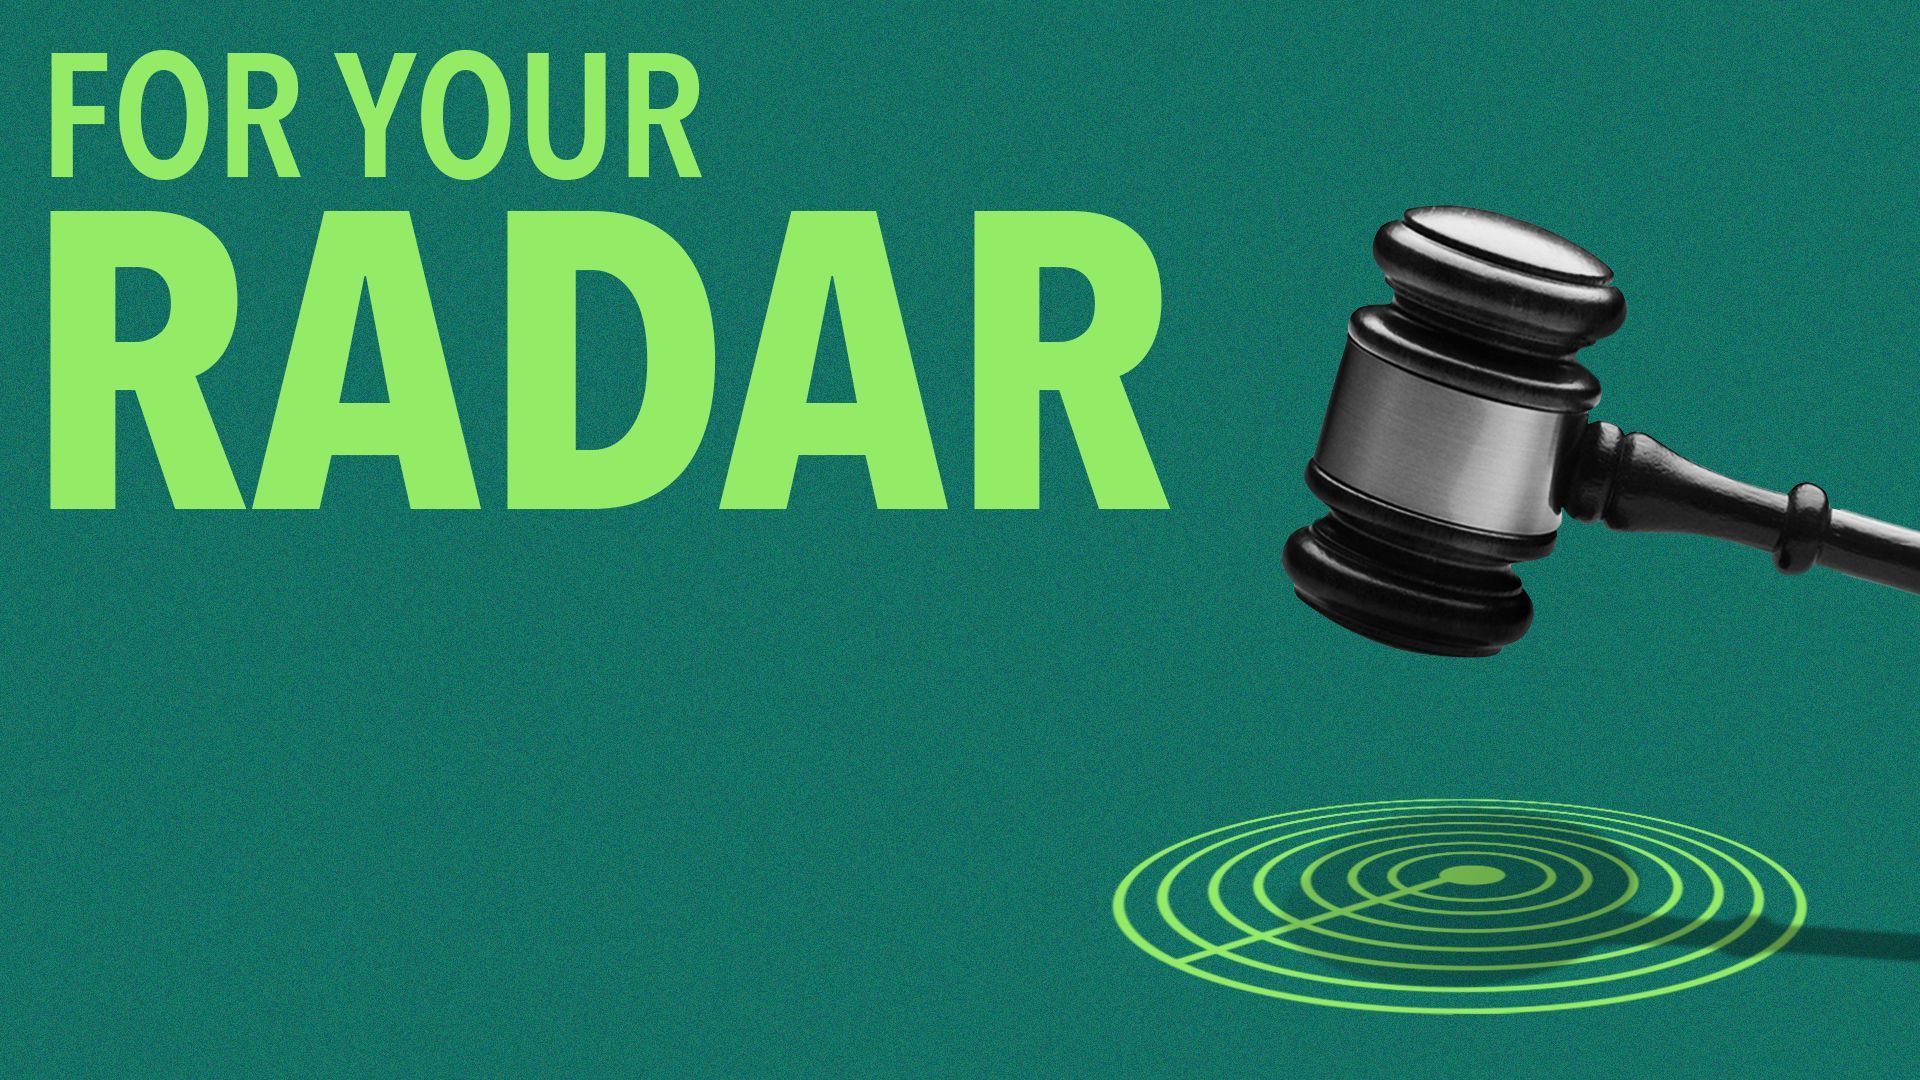 an illustration of a gavel getting ready to hit a radar symbol with the text "for your radar" next to it 